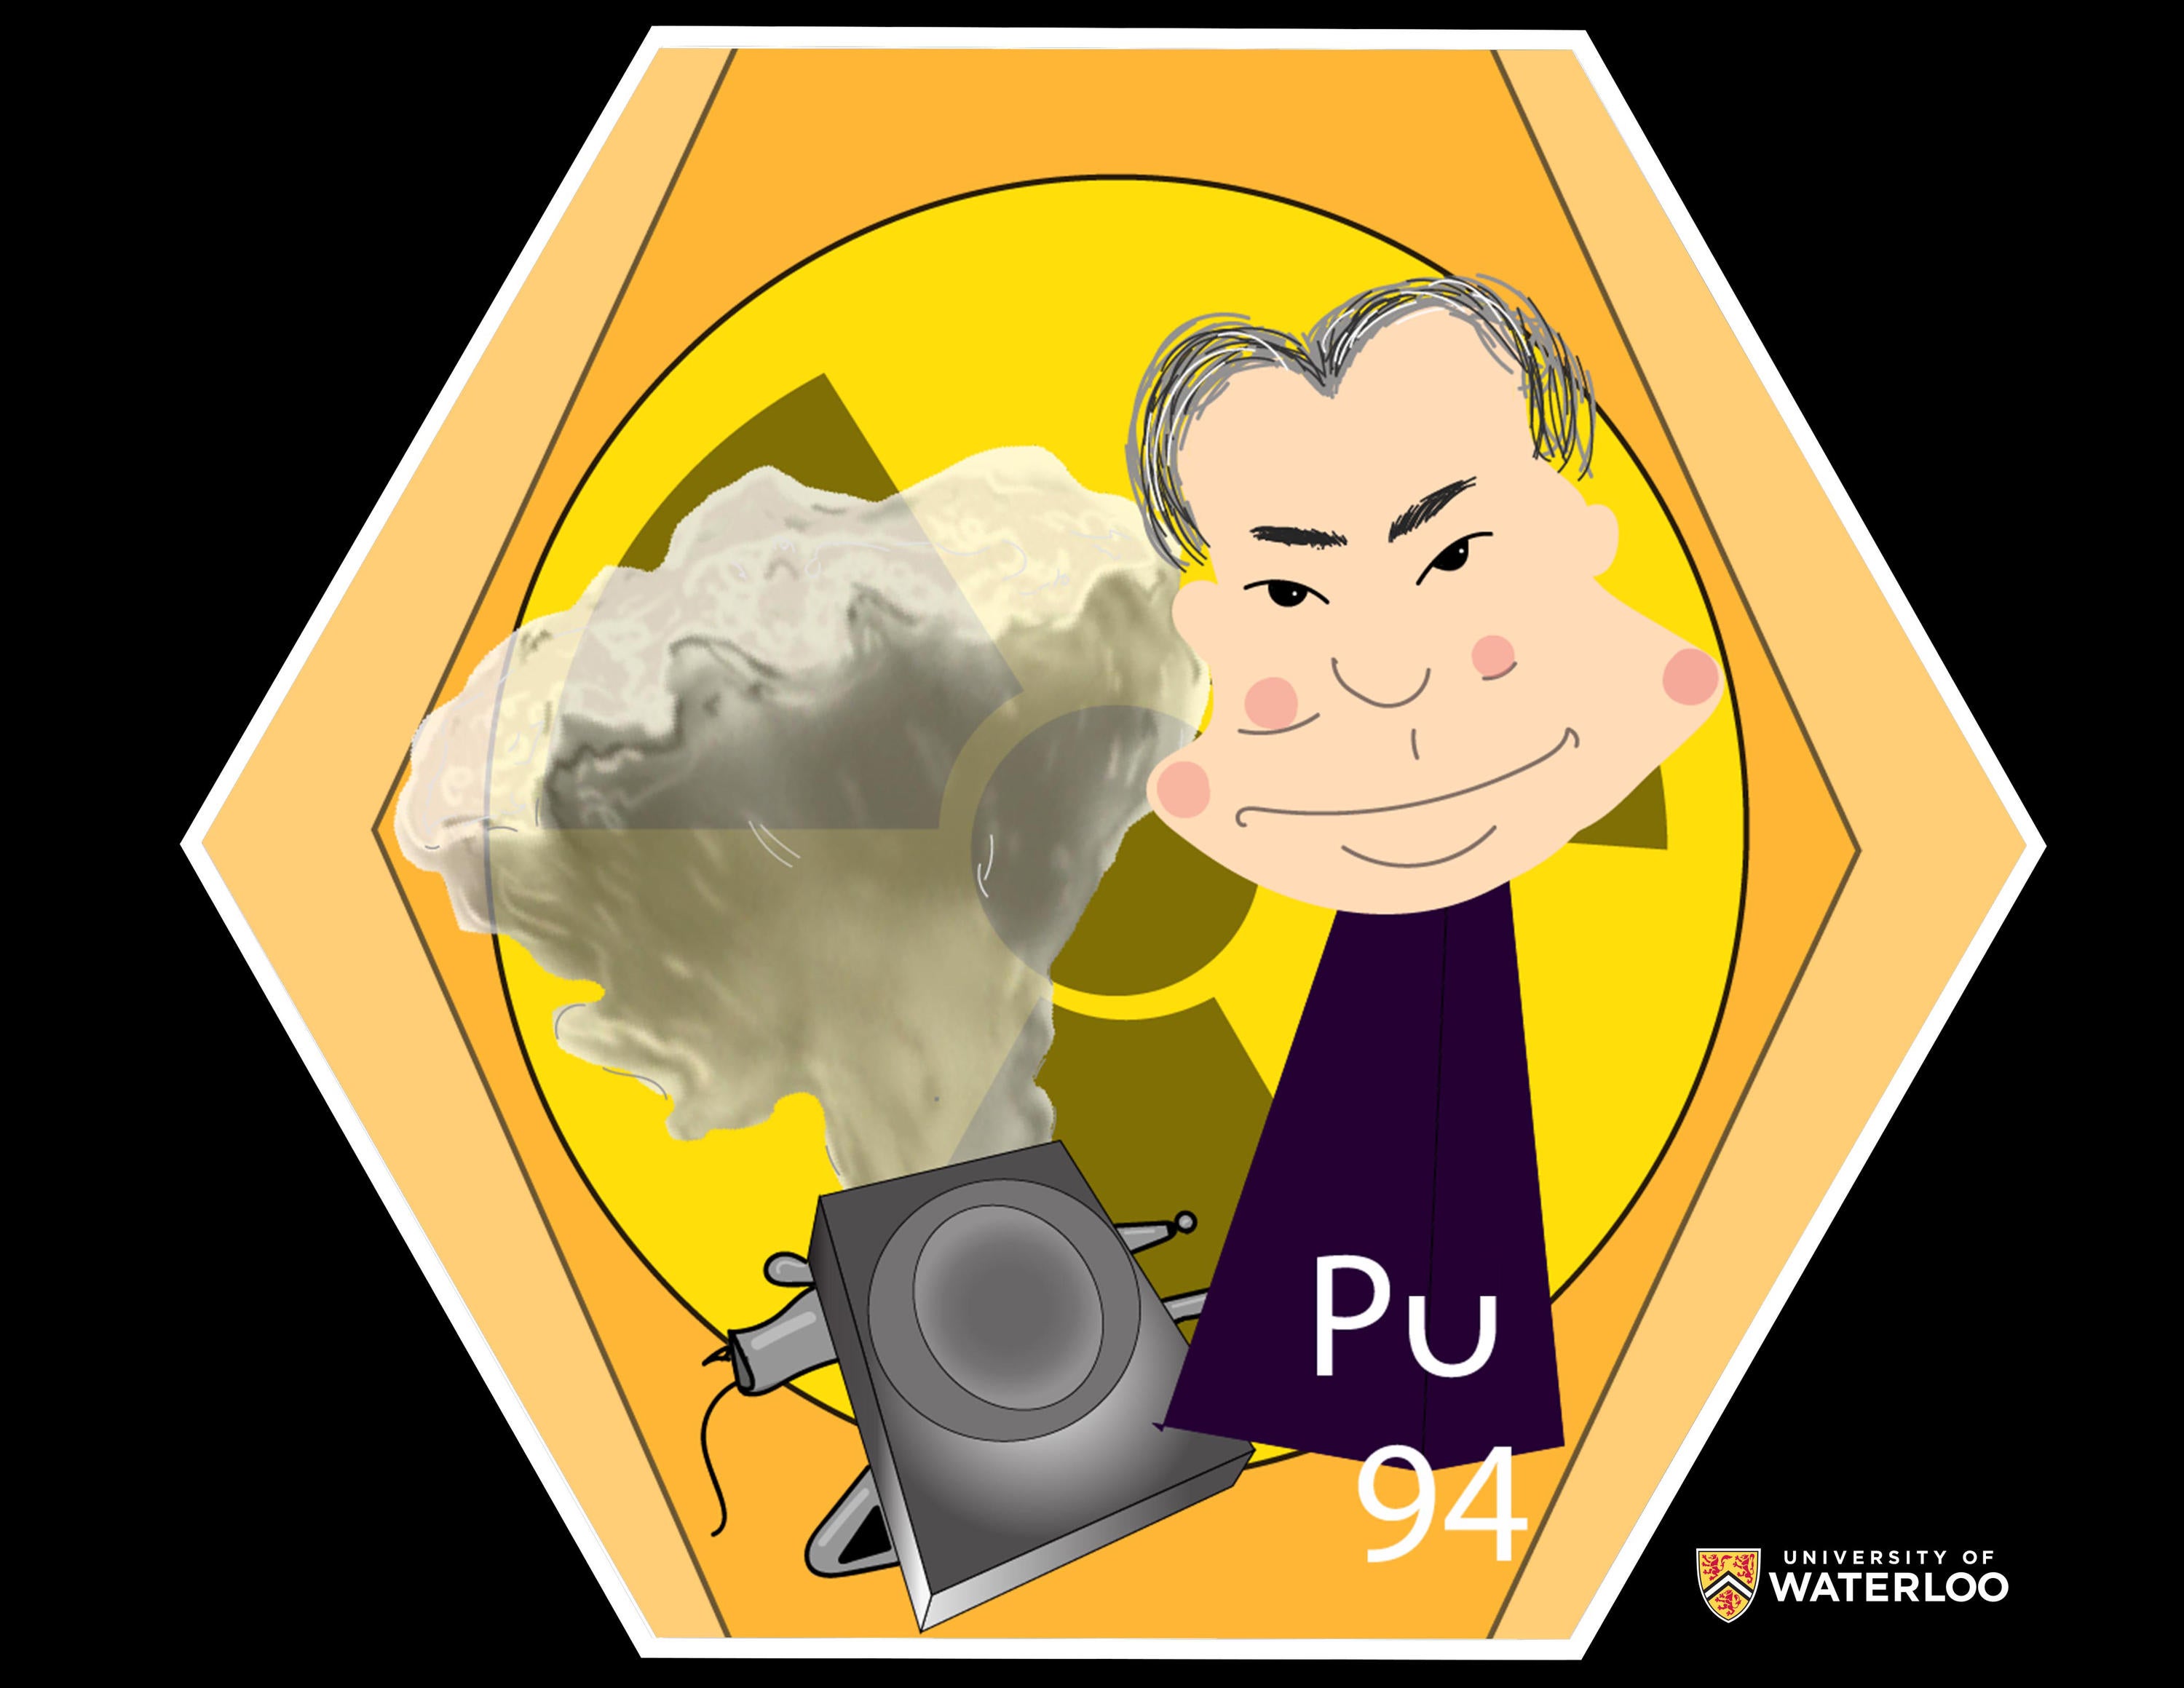 Digital composite on orange background. A cartoon head of Glenn Seaborg centre next to a device that represents a cyclotron with a nuclear mushroom explosion above. In the background is a large radioactive symbol. Chemical symbol “Pu” appears below with “94”.